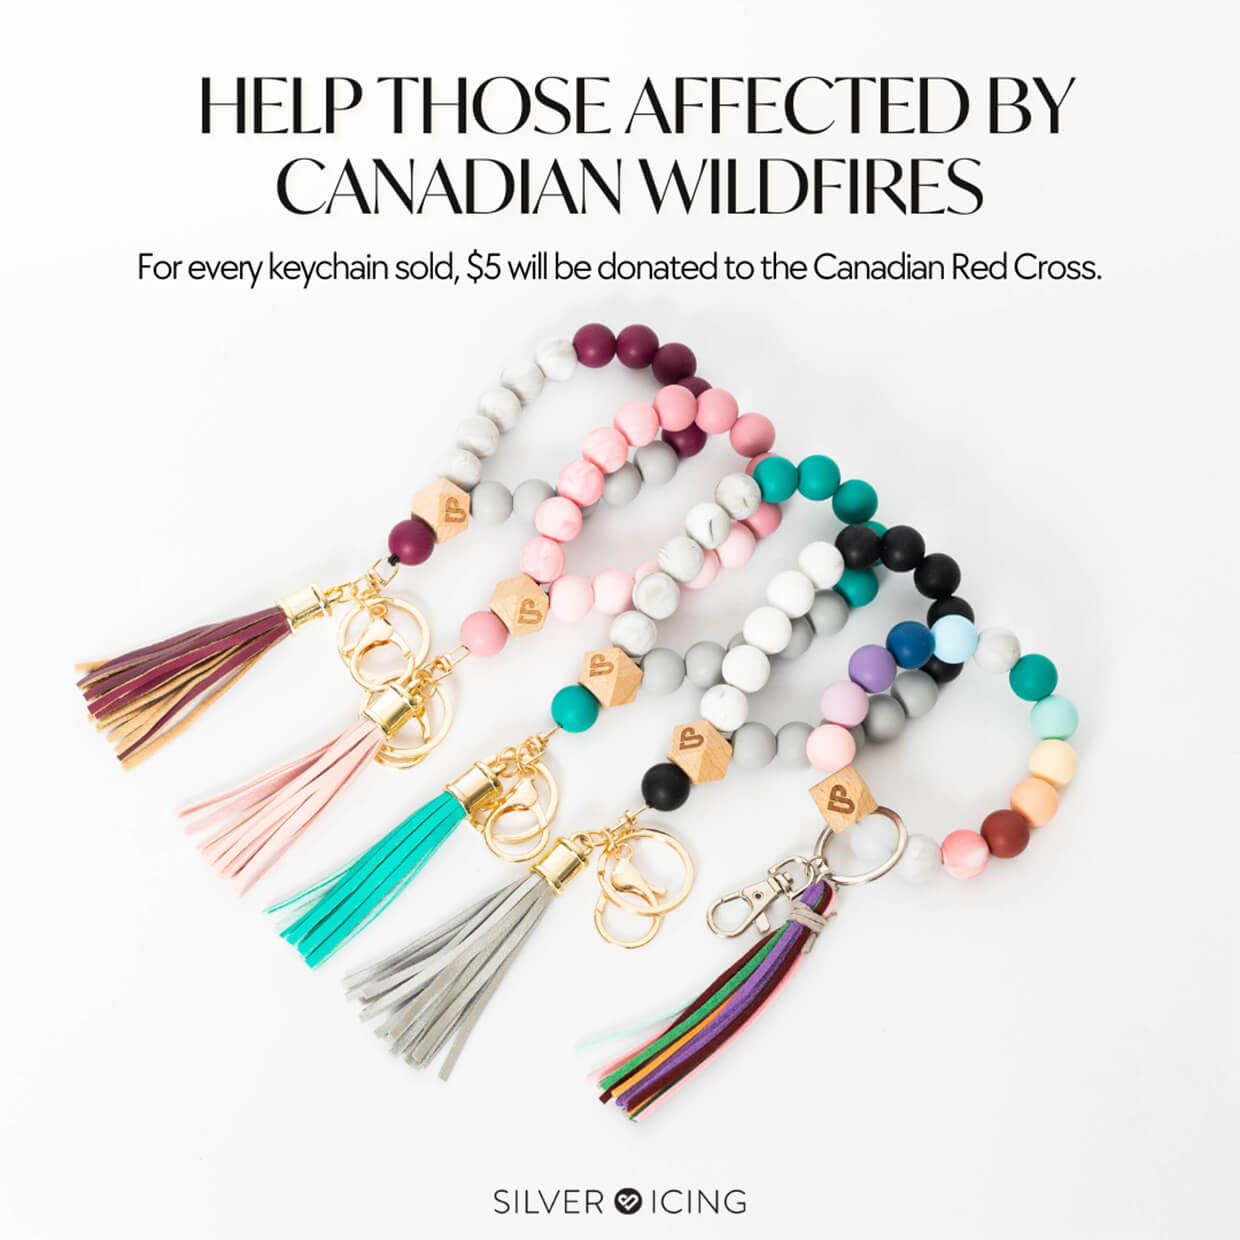 Silver Icing Fundraiser Spotlight: Help Those Affected By Canadian Wildfires